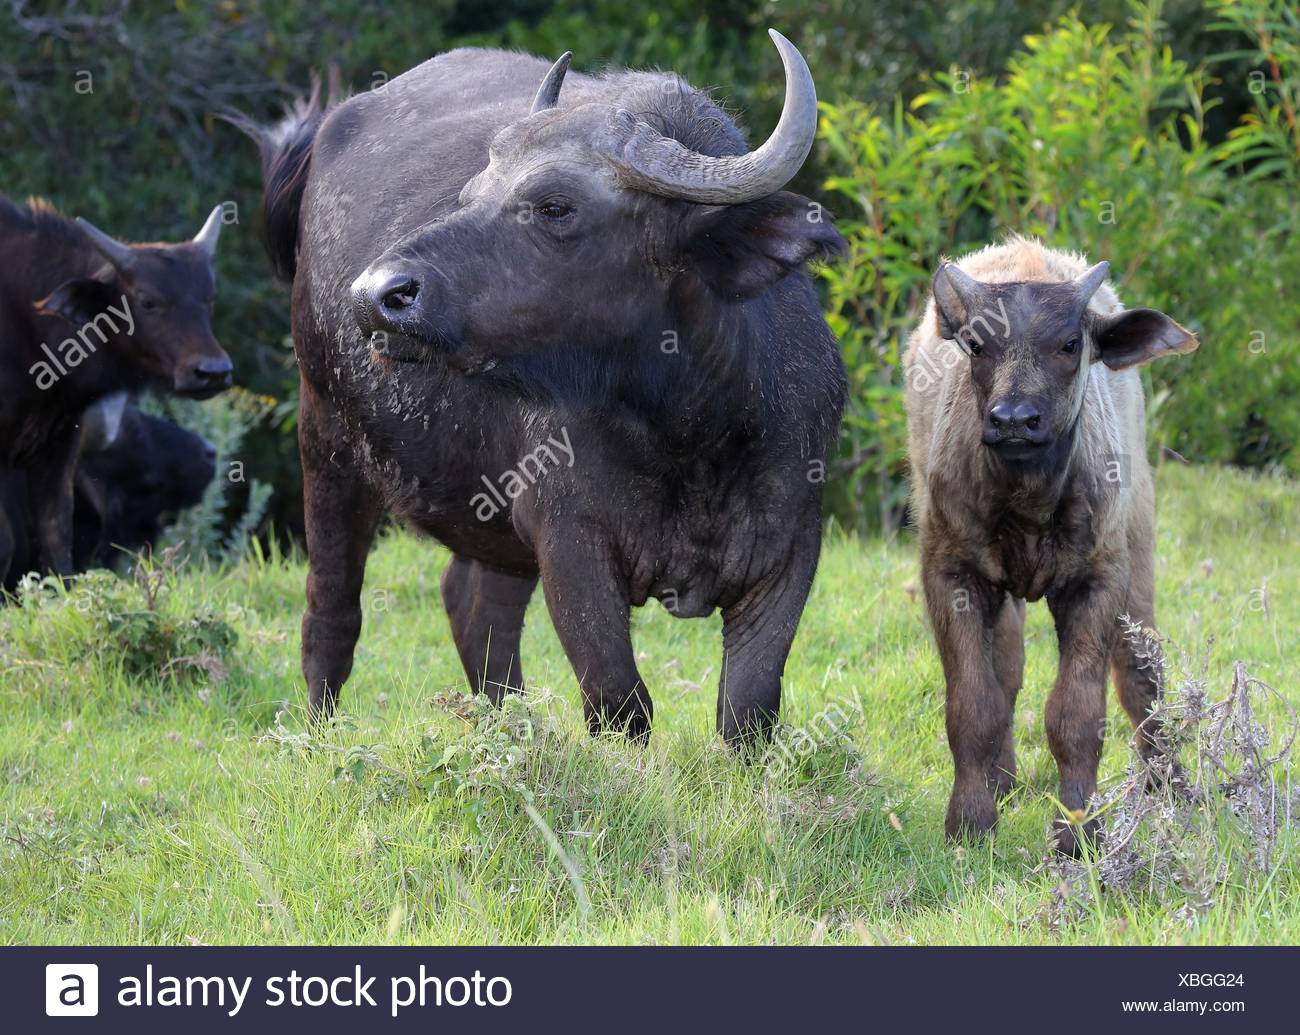 Buffalo cow protecting it's young calf at it's side Stock Photo - Alamy